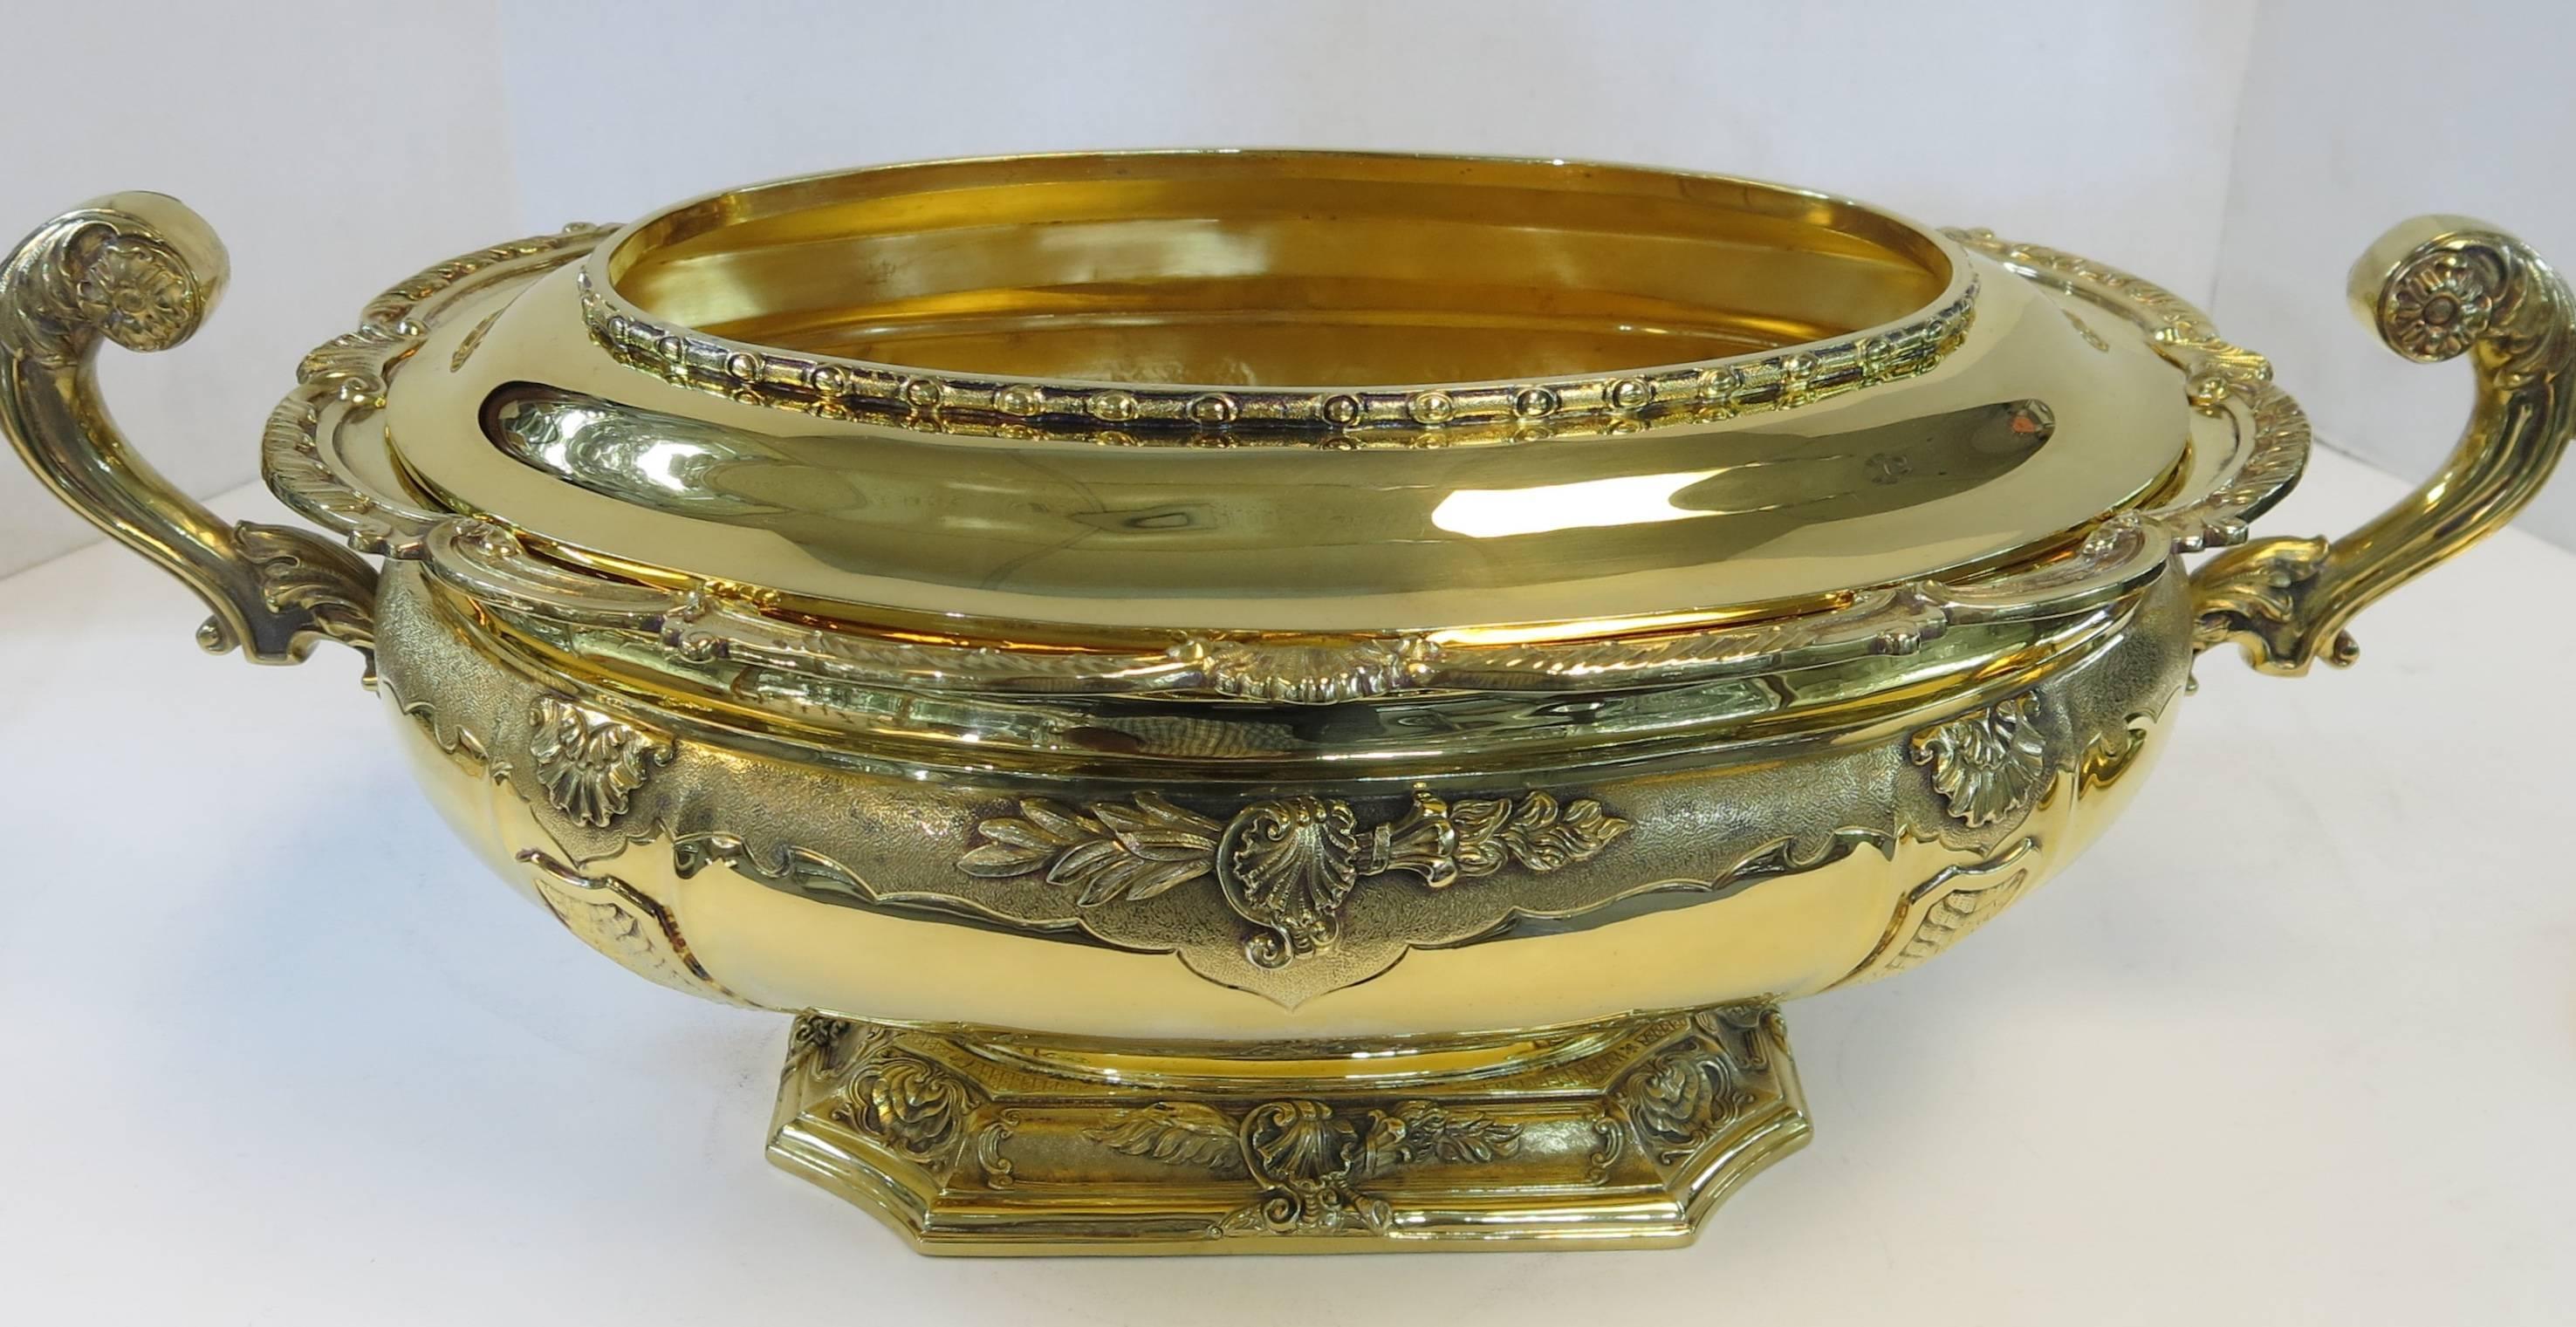 Unusual, Tiffany Sterling Silver Gilt Oval Jardinière or Cooler In Excellent Condition For Sale In New York, NY